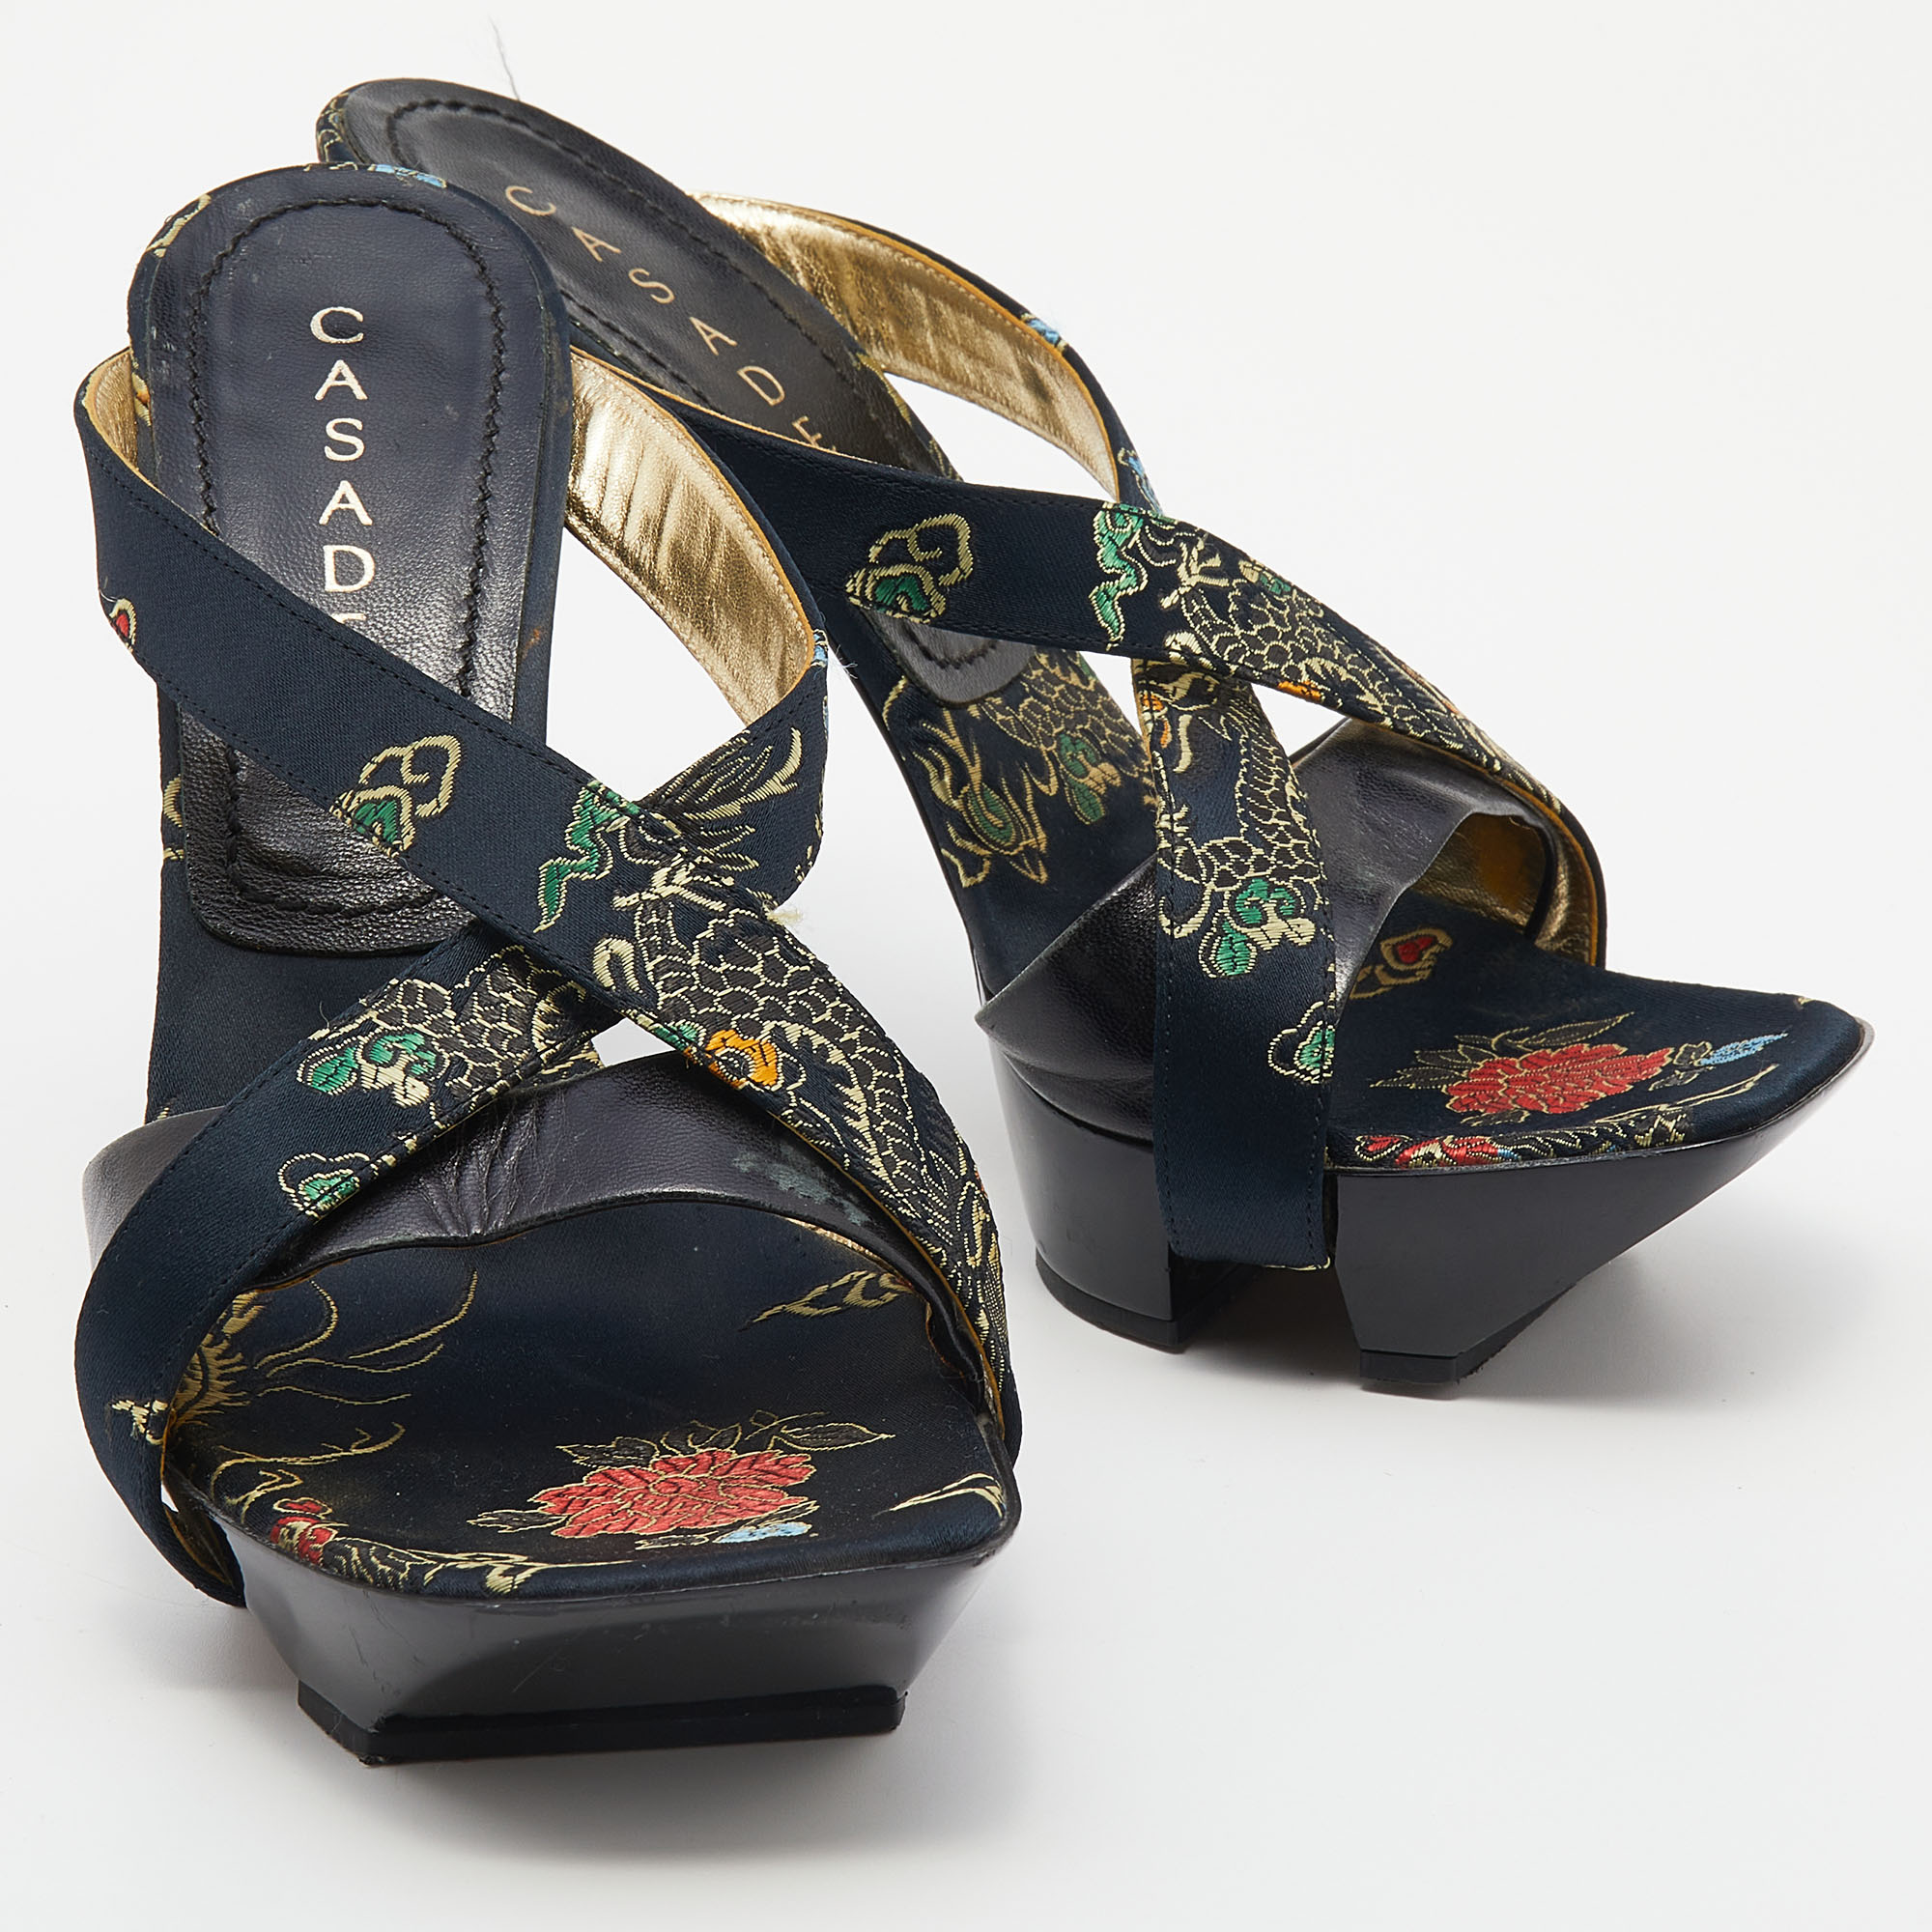 Casadei Multicolor Embroidered Satin And Leather Leather Strappy Platform Open Toe Sandals Size 37.5